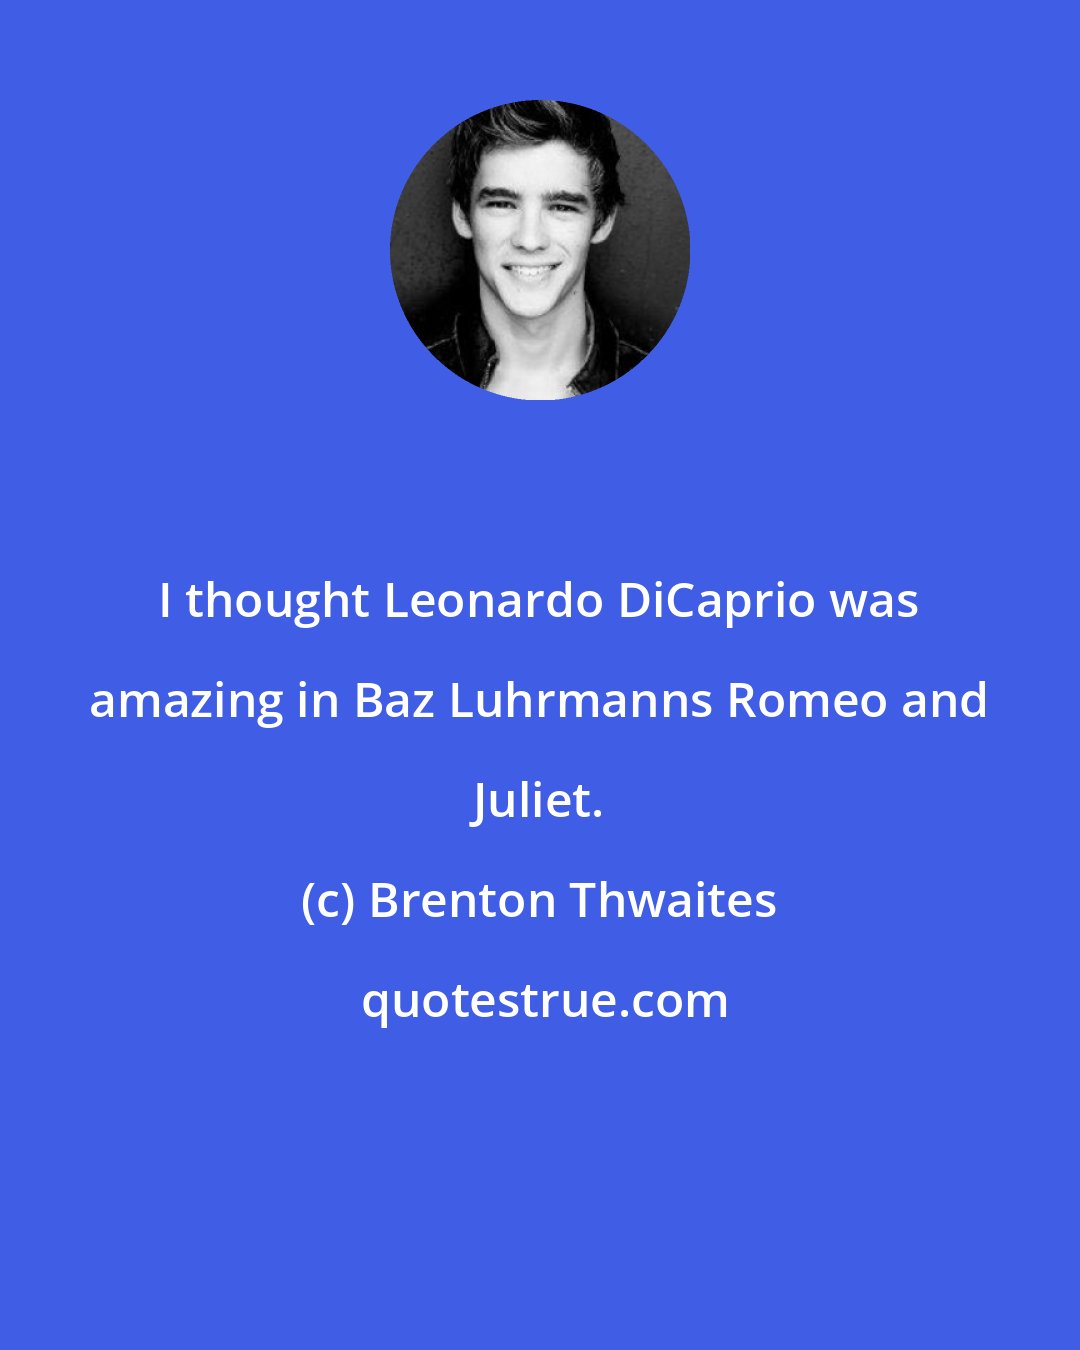 Brenton Thwaites: I thought Leonardo DiCaprio was amazing in Baz Luhrmanns Romeo and Juliet.